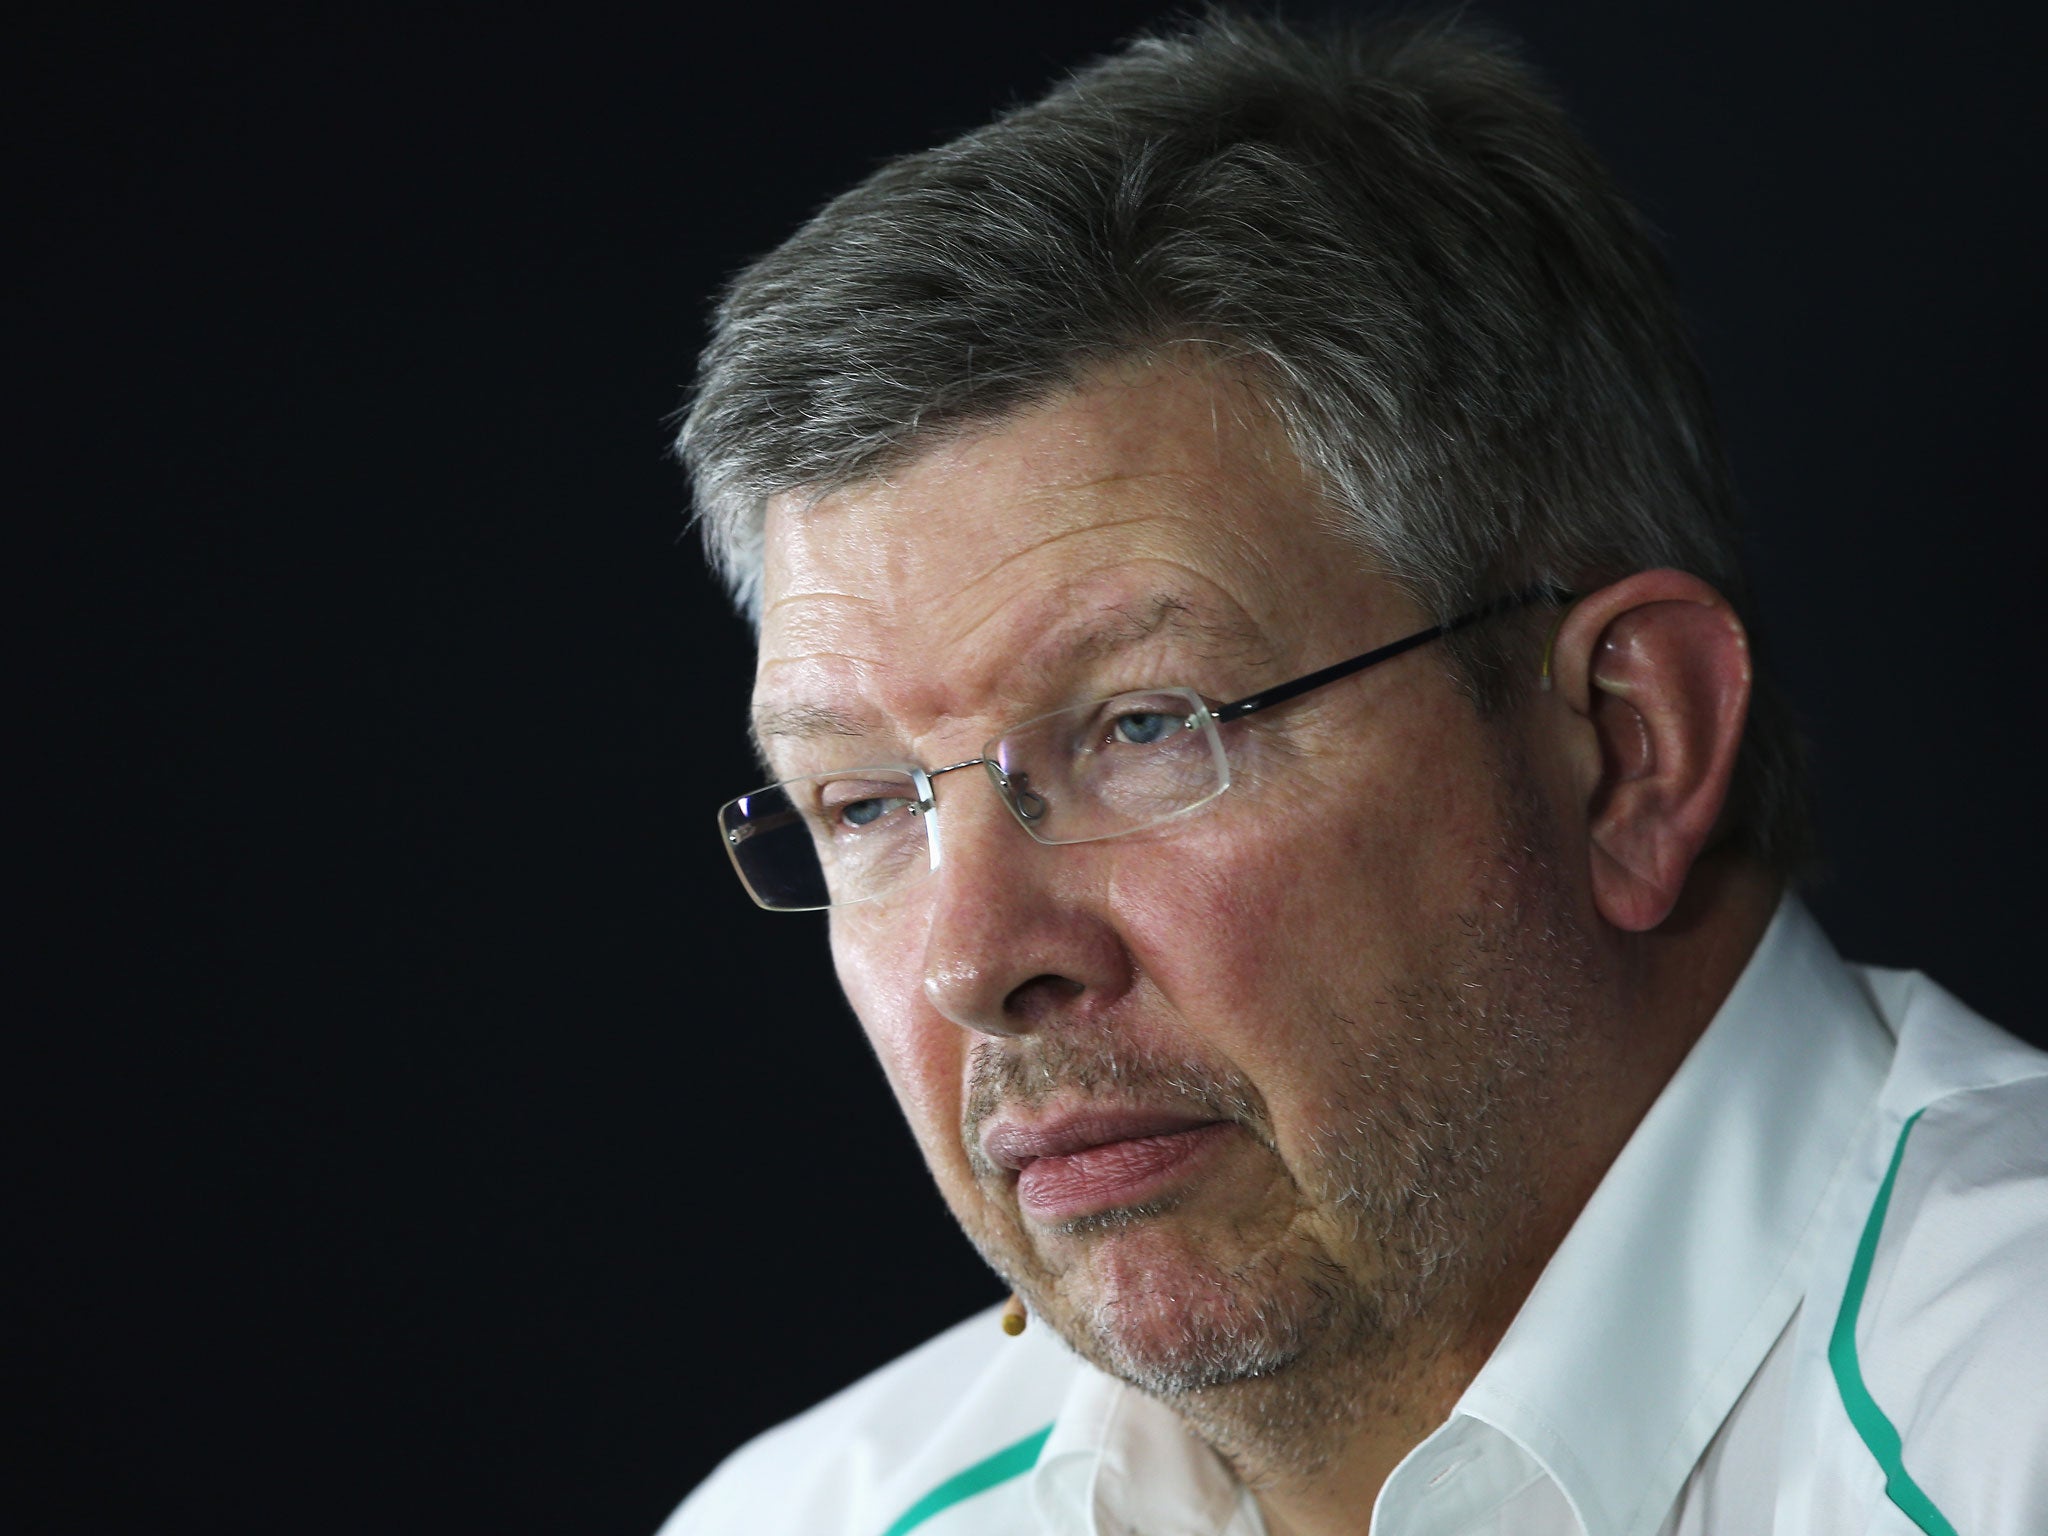 Ross Brawn speaks to the press during the Indian Grand Prix last weekend